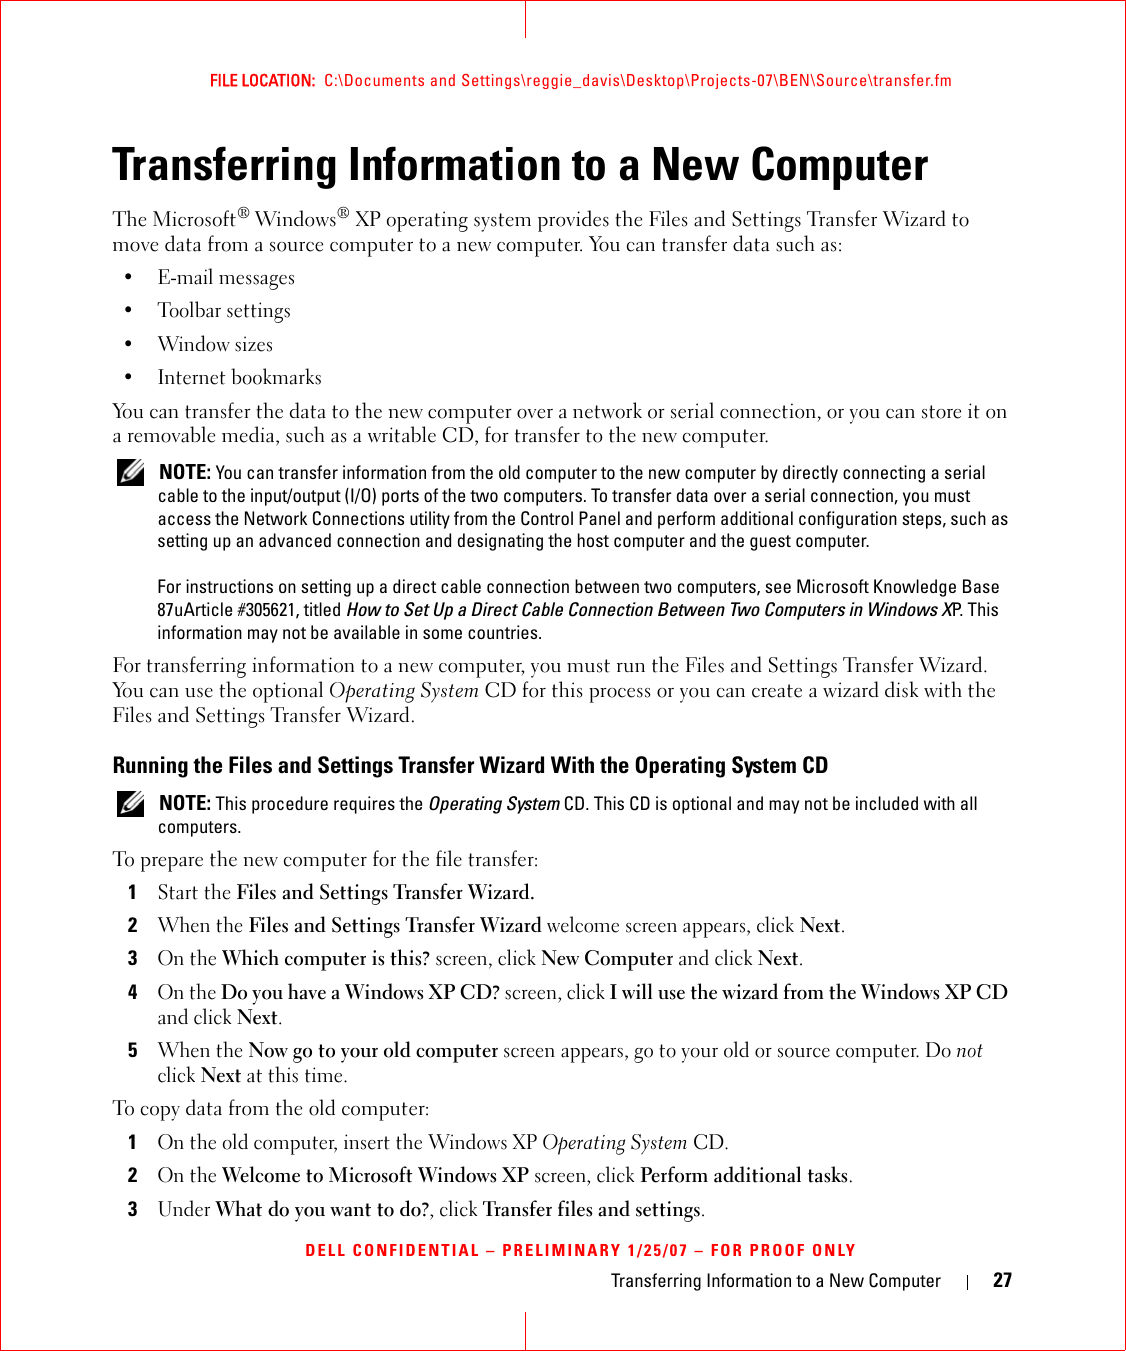 Transferring Information to a New Computer 27FILE LOCATION:  C:\Documents and Settings\reggie_davis\Desktop\Projects-07\BEN\Source\transfer.fmDELL CONFIDENTIAL – PRELIMINARY 1/25/07 – FOR PROOF ONLYTransferring Information to a New ComputerThe Microsoft® Windows® XP operating system provides the Files and Settings Transfer Wizard to move data from a source computer to a new computer. You can transfer data such as:• E-mail messages• Toolbar settings•Window sizes• Internet bookmarks You can transfer the data to the new computer over a network or serial connection, or you can store it on a removable media, such as a writable CD, for transfer to the new computer. NOTE: You can transfer information from the old computer to the new computer by directly connecting a serial cable to the input/output (I/O) ports of the two computers. To transfer data over a serial connection, you must access the Network Connections utility from the Control Panel and perform additional configuration steps, such as setting up an advanced connection and designating the host computer and the guest computer.For instructions on setting up a direct cable connection between two computers, see Microsoft Knowledge Base 87uArticle #305621, titled How to Set Up a Direct Cable Connection Between Two Computers in Windows XP. This information may not be available in some countries.For transferring information to a new computer, you must run the Files and Settings Transfer Wizard. You can use the optional Operating System CD for this process or you can create a wizard disk with the Files and Settings Transfer Wizard.Running the Files and Settings Transfer Wizard With the Operating System CD NOTE: This procedure requires the Operating System CD. This CD is optional and may not be included with all computers.To prepare the new computer for the file transfer:1Start the Files and Settings Transfer Wizard. 2When the Files and Settings Transfer Wizard welcome screen appears, click Next.3On the Which computer is this? screen, click New Computer and click Next.4On the Do you have a Windows XP CD? screen, click I will use the wizard from the Windows XP CD and click Next.5When the Now go to your old computer screen appears, go to your old or source computer. Do not click Next at this time.To copy data from the old computer:1On the old computer, insert the Windows XP Operating System CD.2On the Welcome to Microsoft Windows XP screen, click Perform additional tasks.3Under What do you want to do?, click Transfer files and settings.